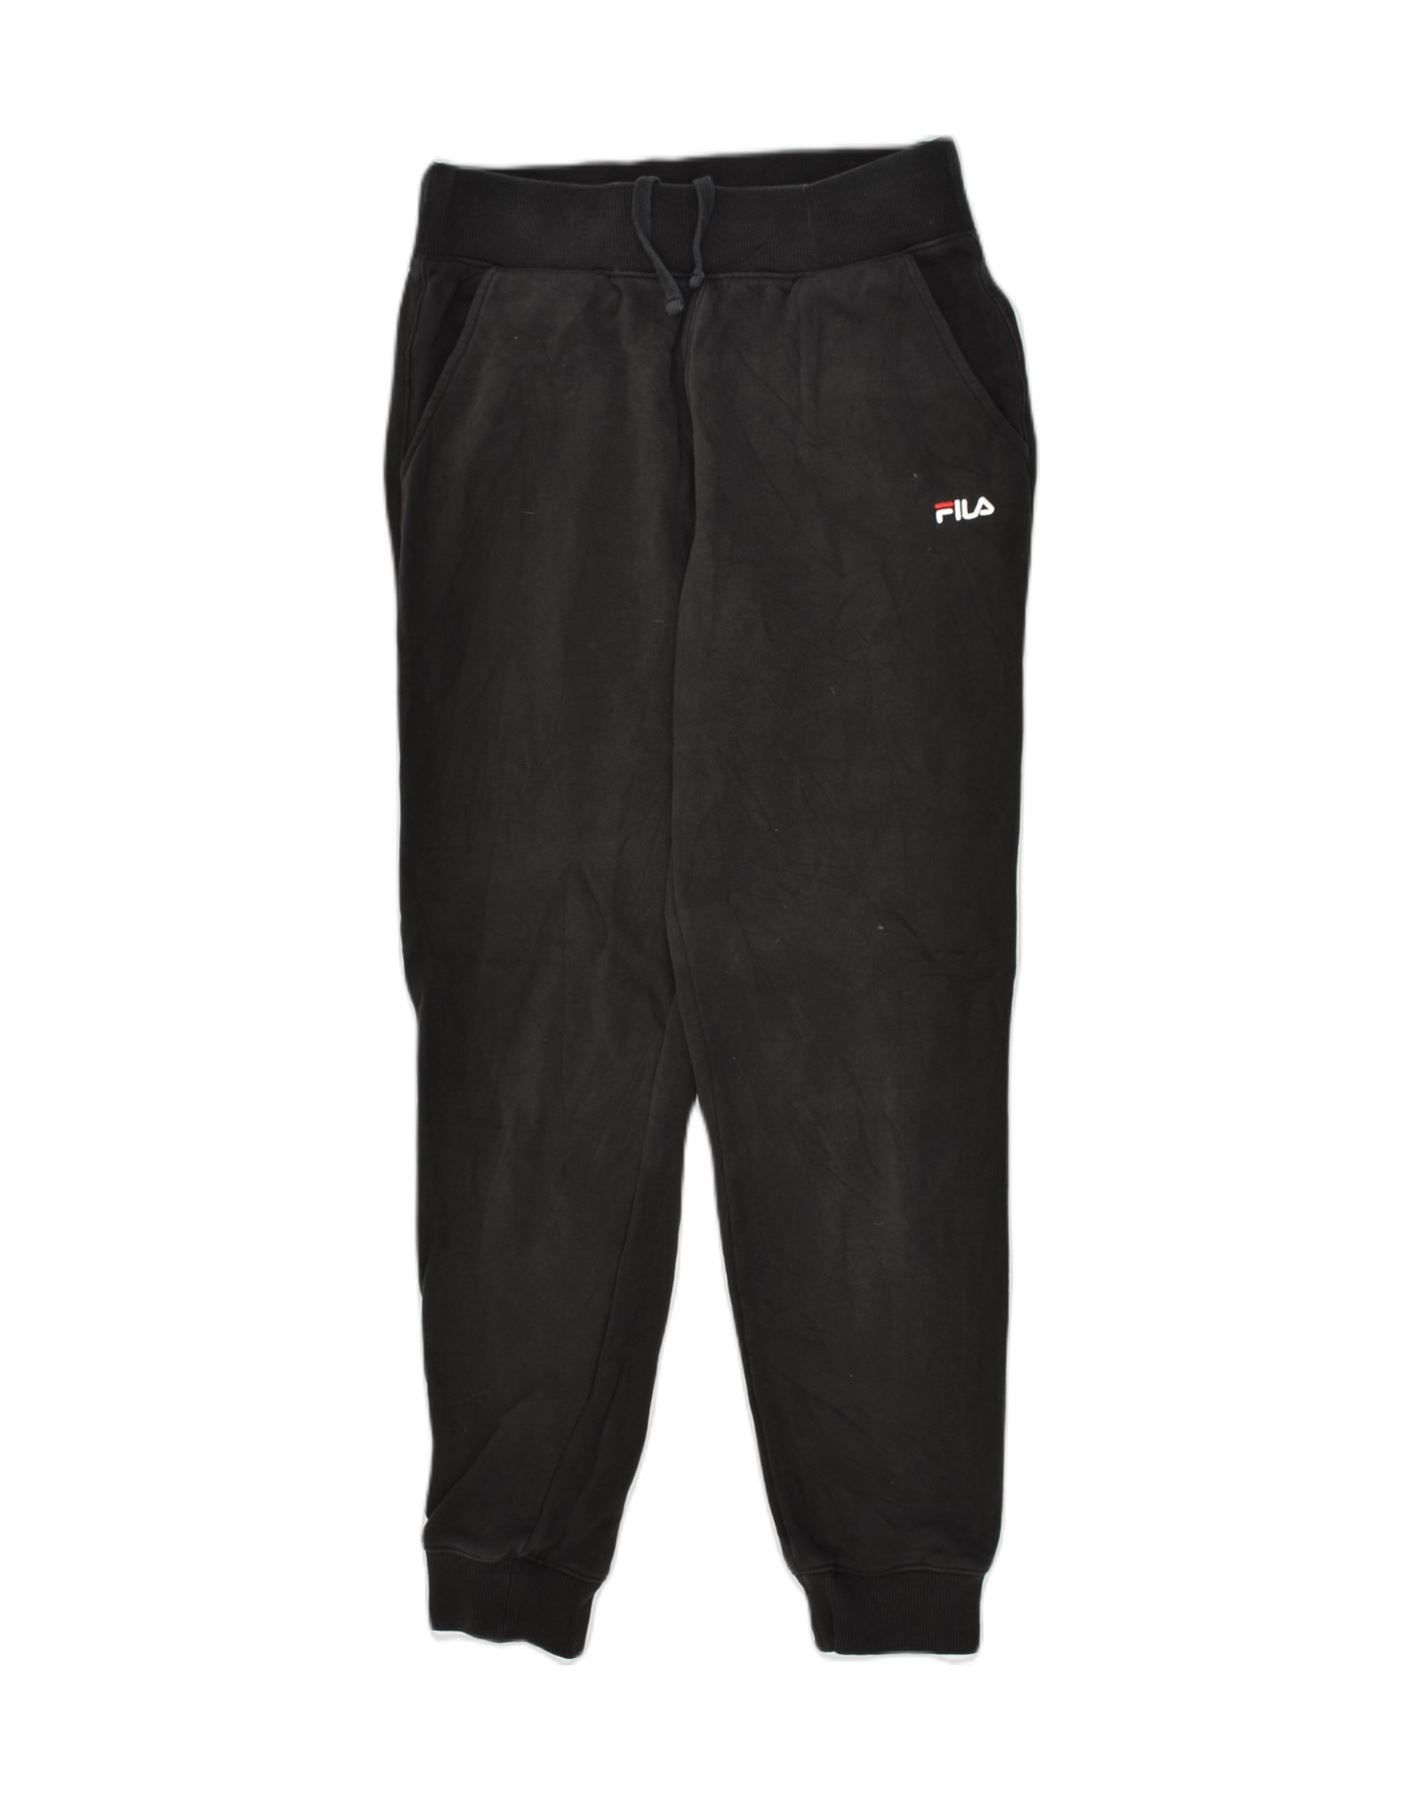 FILA Womens Tracksuit Trousers Joggers UK 10 Small Black Polyester